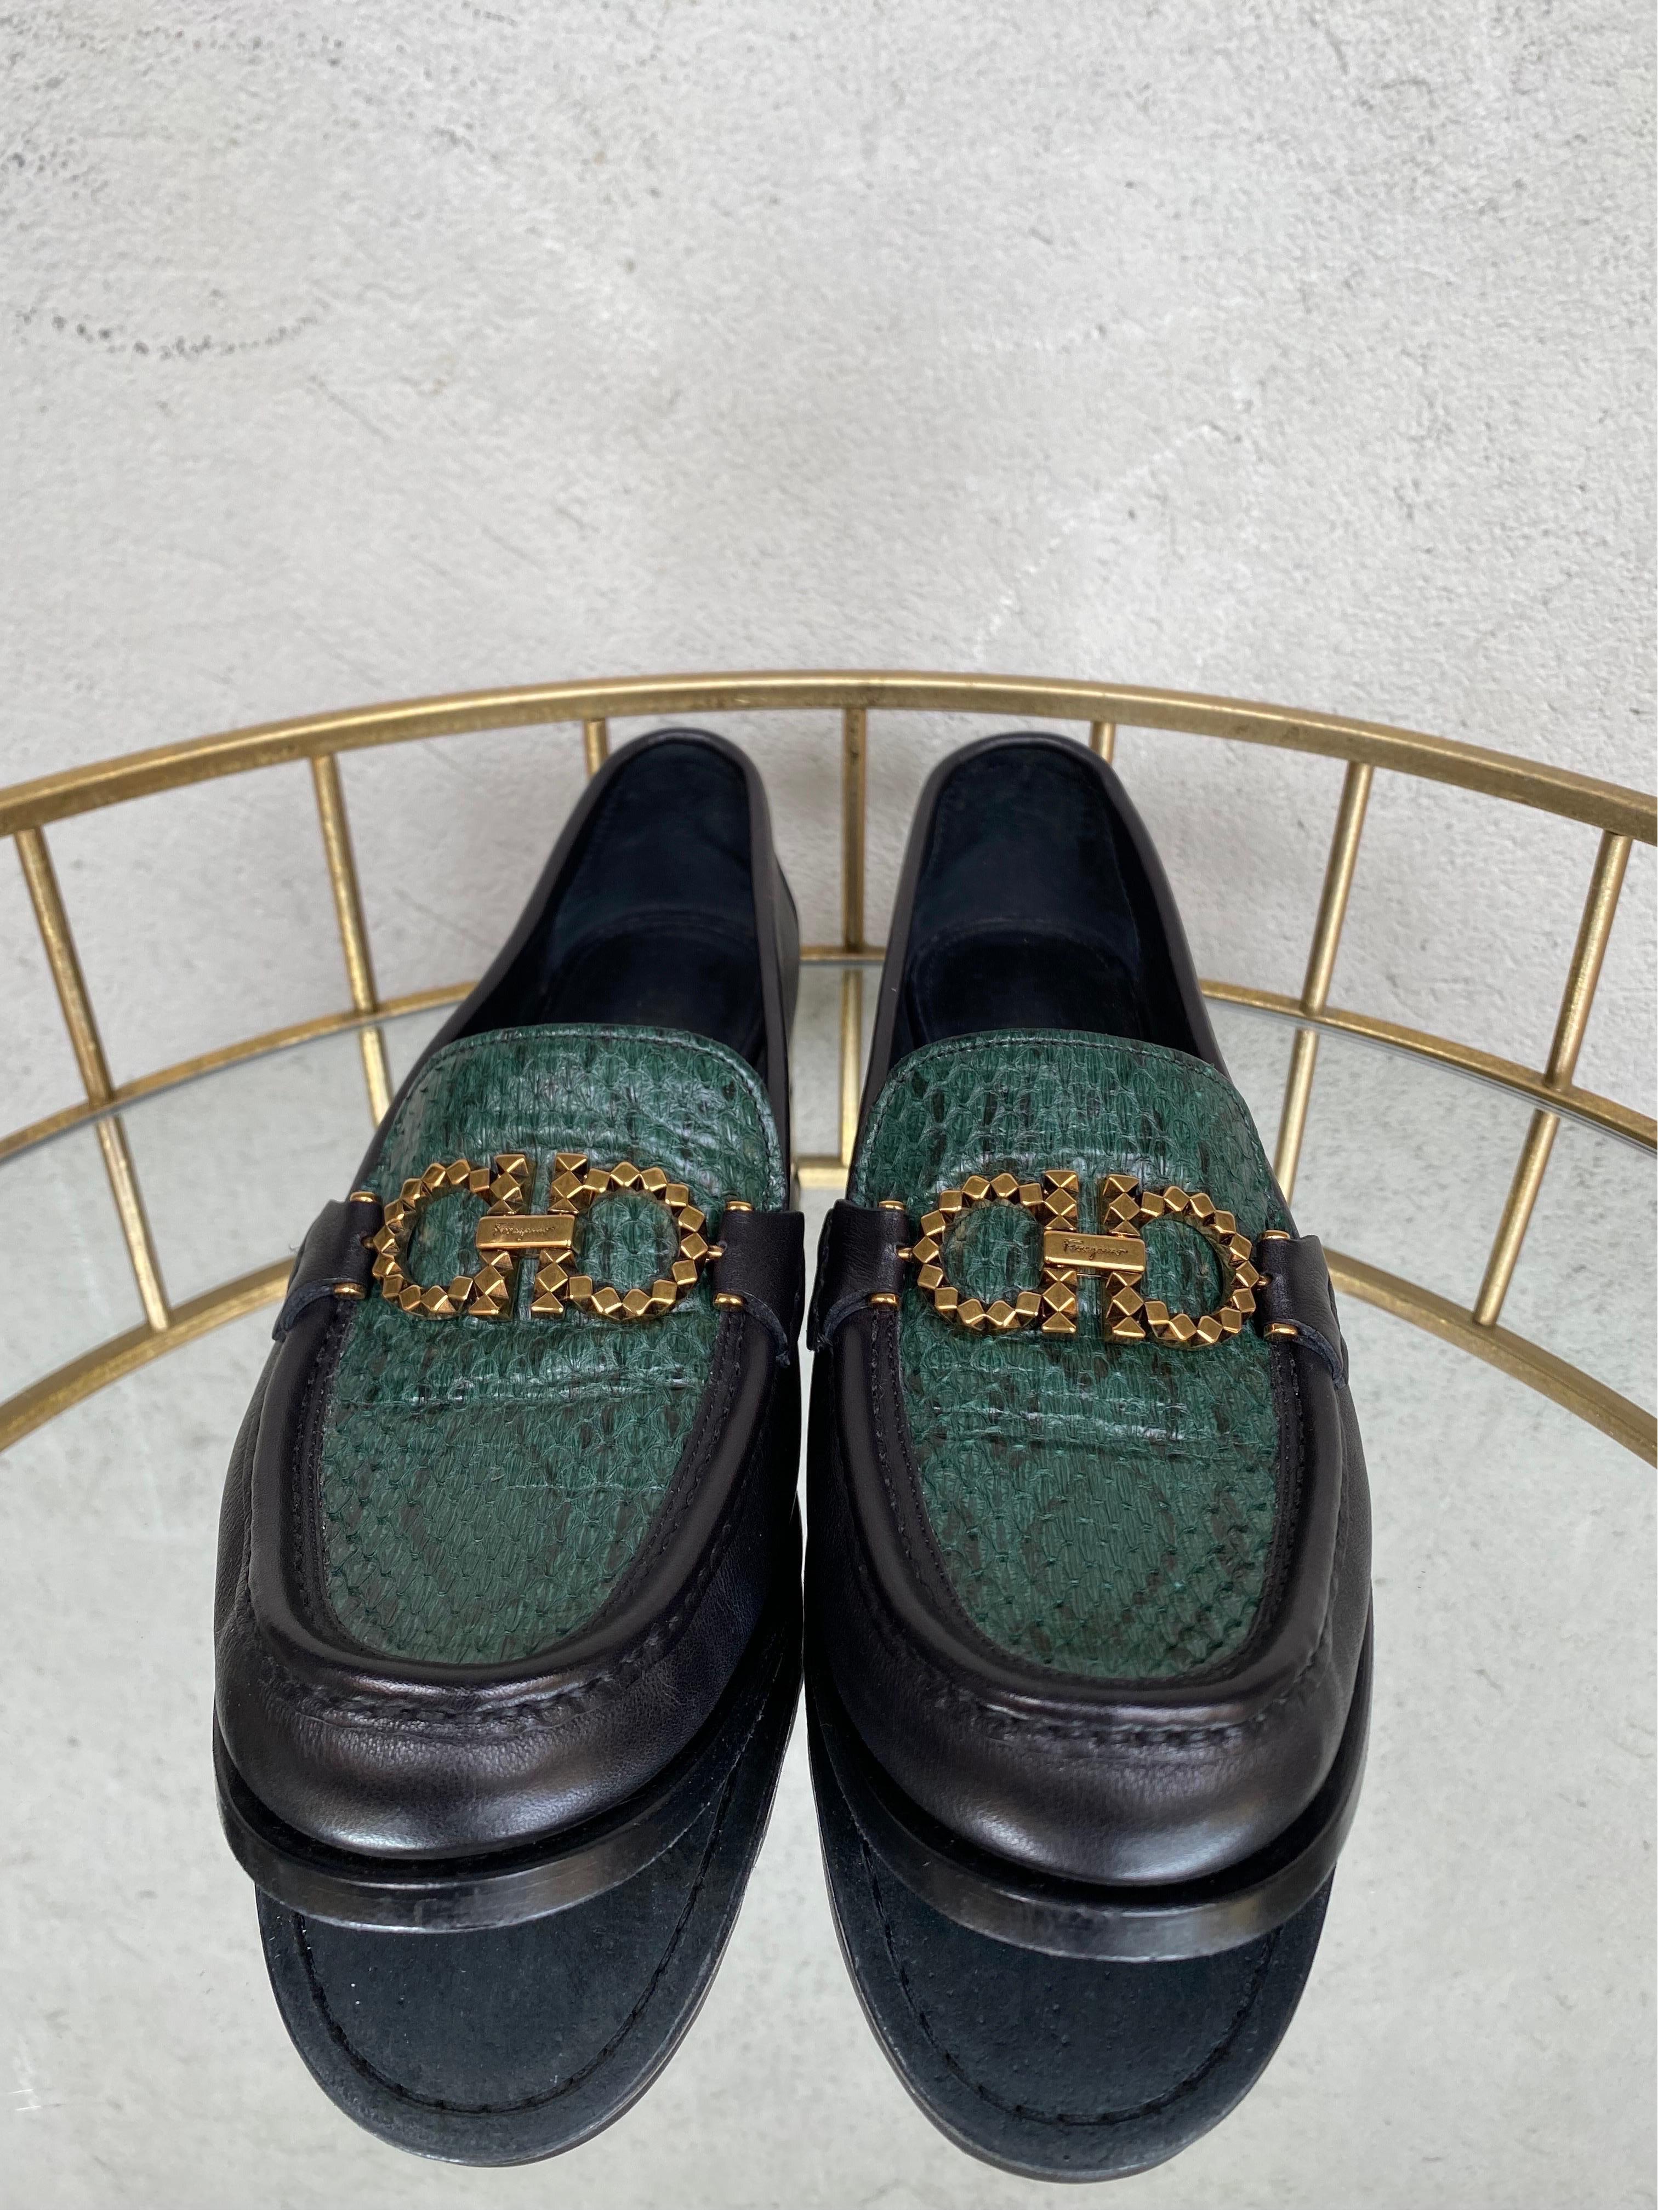 Salvatore Ferragamo loafers
In soft black leather.
With gold hardware and green python part.
Number 8.5 D.
Sole 26 cm.
In excellent condition, shows signs of normal use.